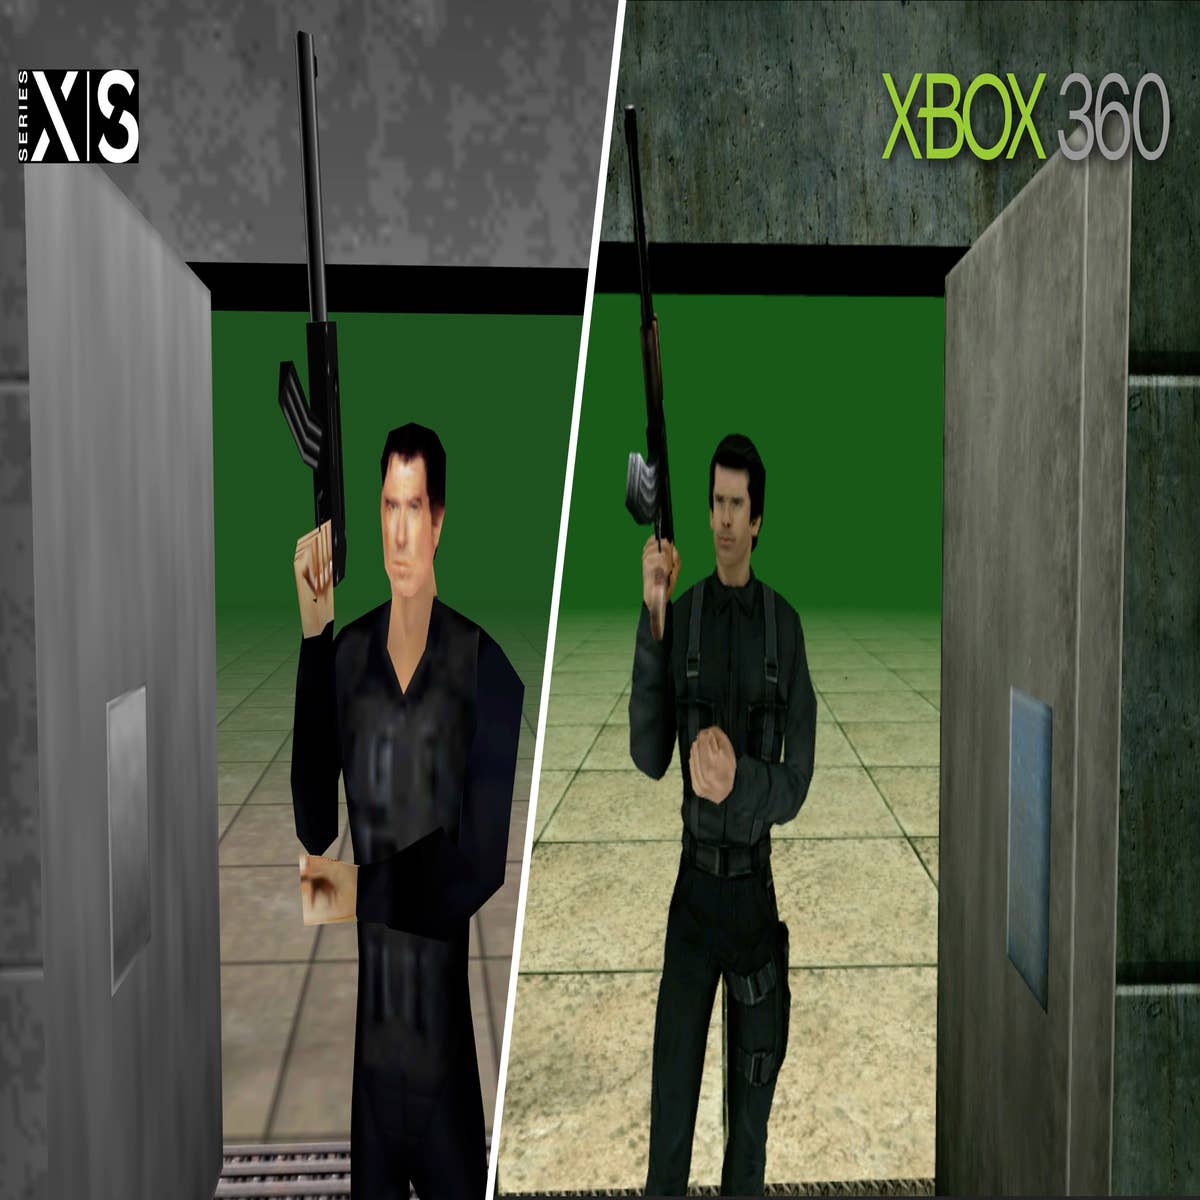 GoldenEye 007 is Out Now for Xbox Game Pass, But You Can't Use Old